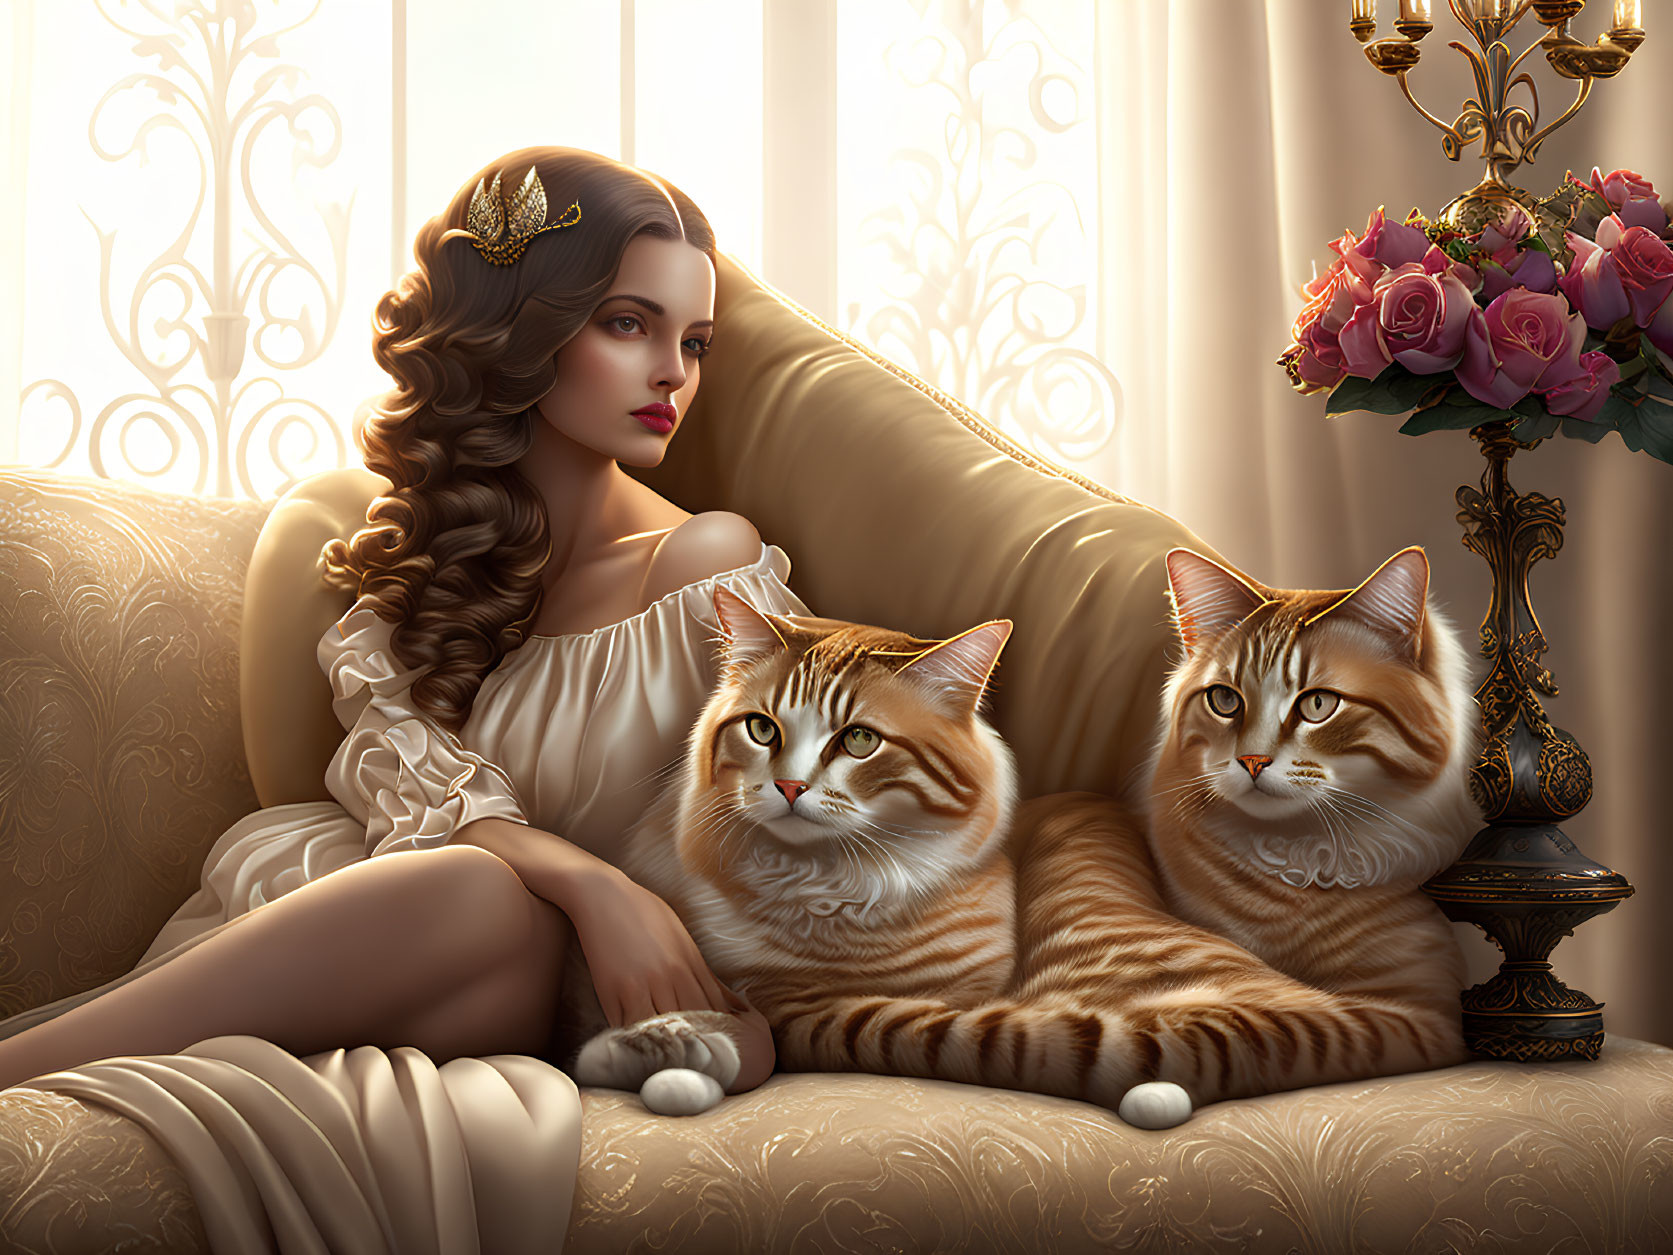 Woman with wavy hair sitting near two large cats on elegant sofa by window with vase of roses.